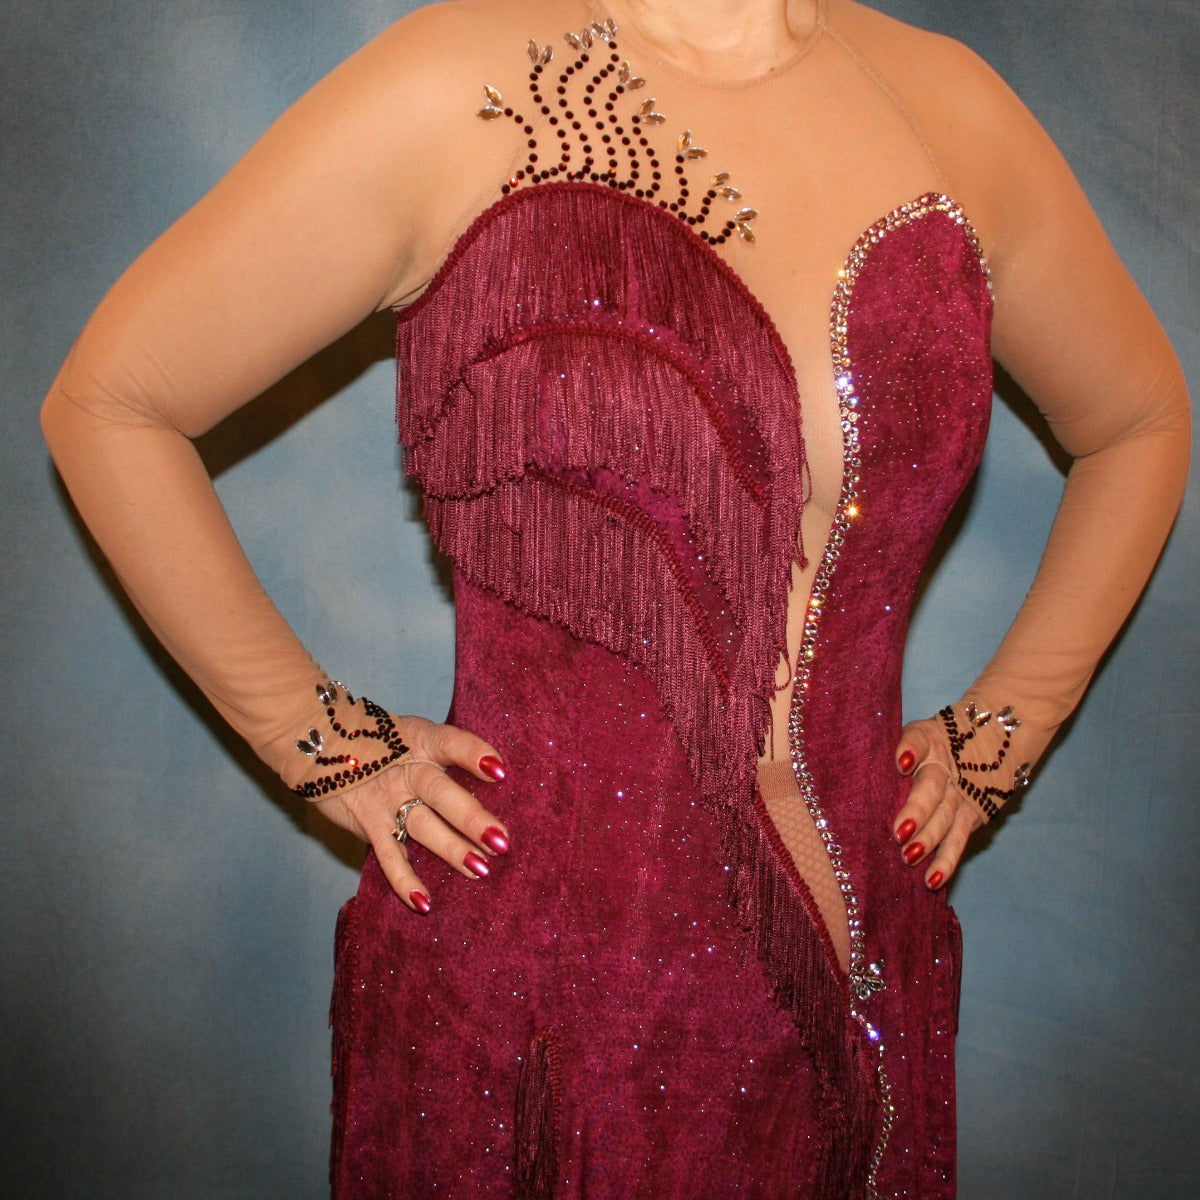 close front view of Burgundy Latin/rhythm dress created of burgundy glitter slinky with subtle reptilia print on a nude illusion base with chainette fringe, embellished with crystal & burgundy Swarovski rhinestone work.